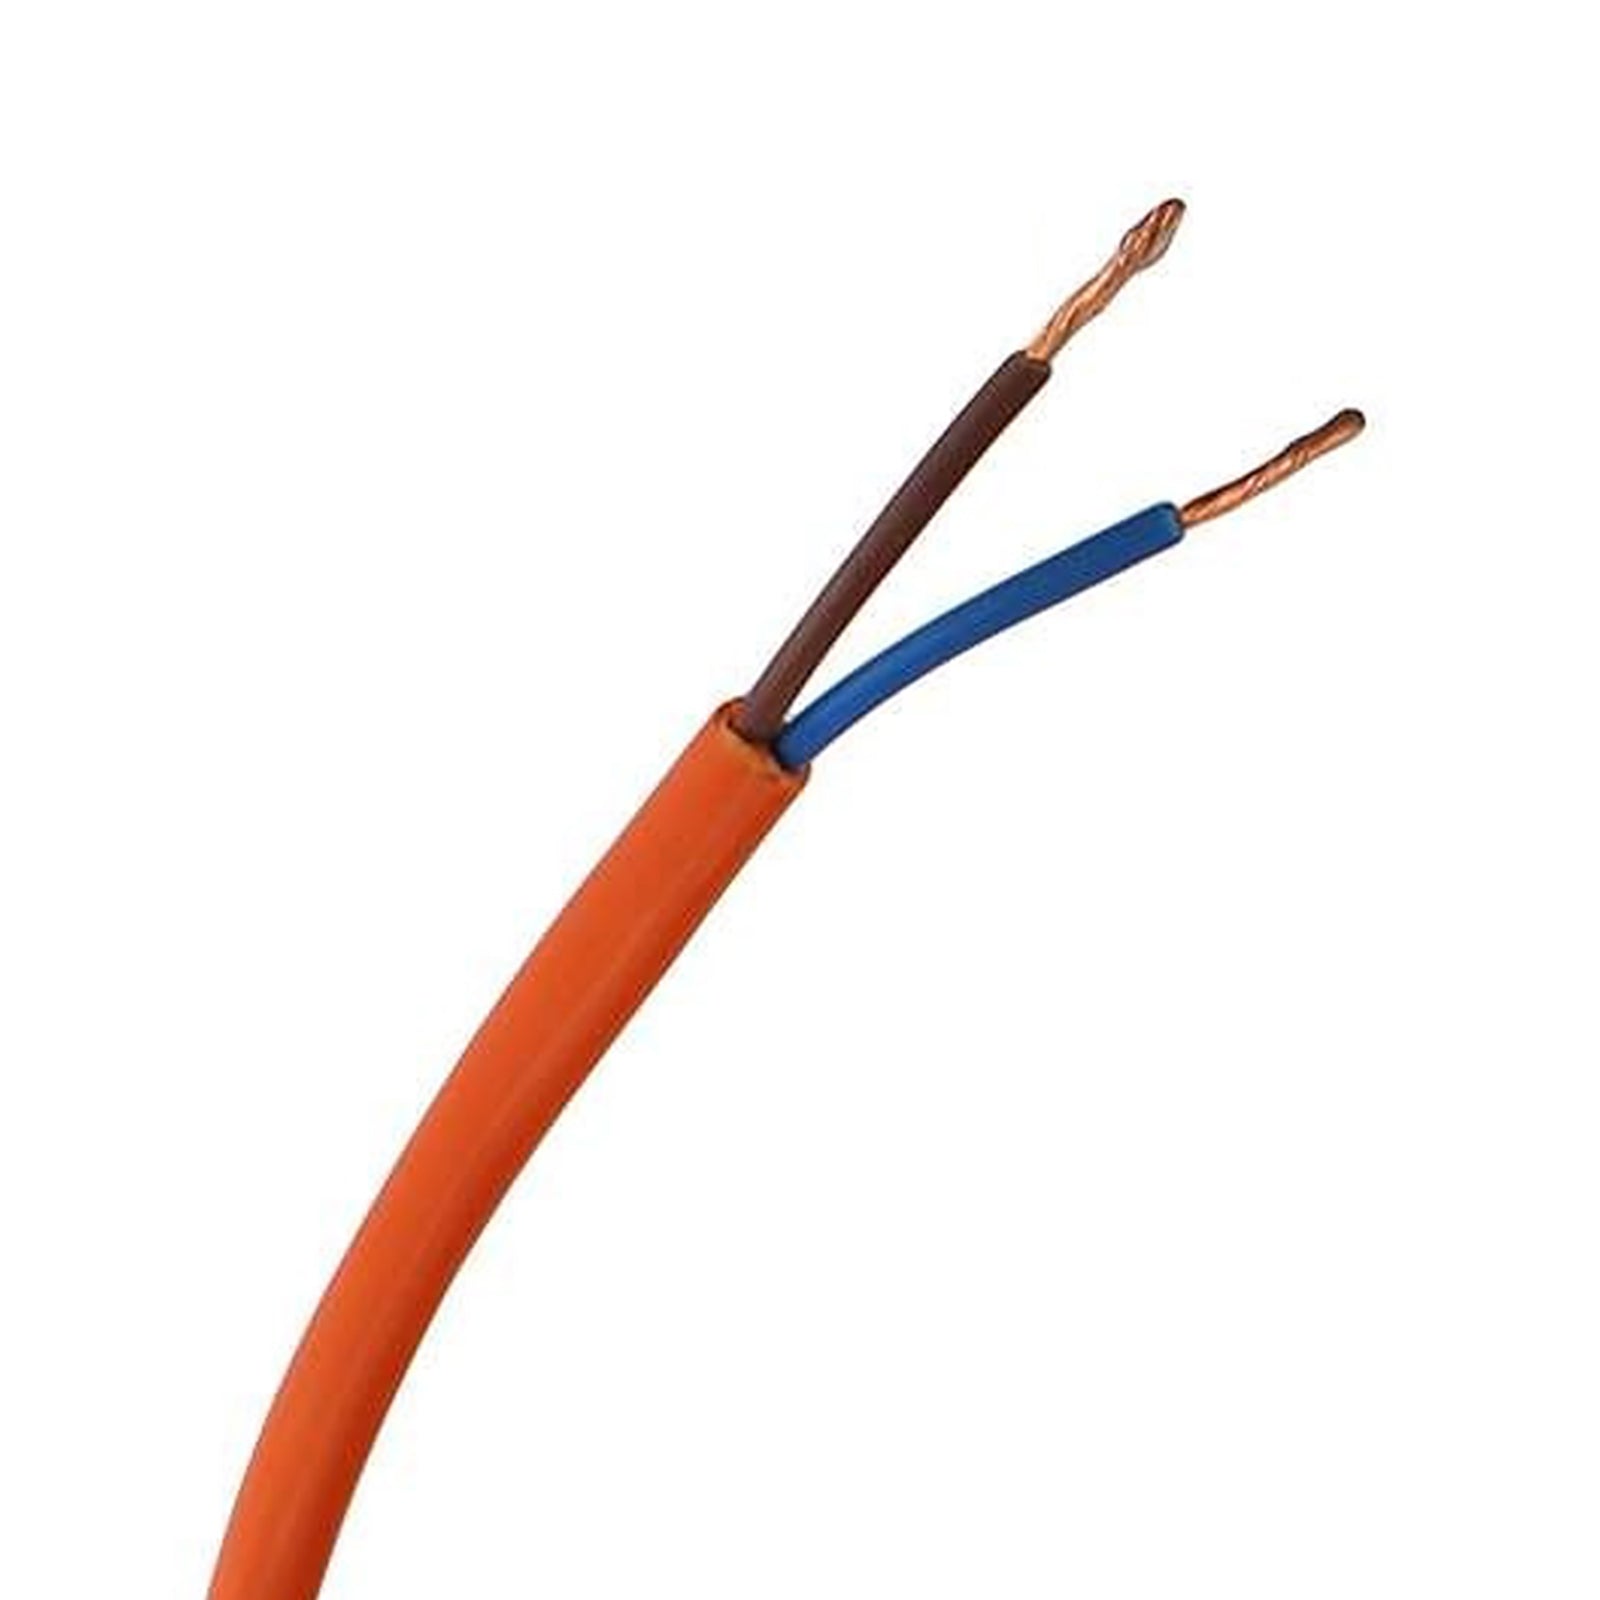 12m Power Cable For Flymo Easi Glide 300V 330VX Lawnmower Extra Long 12 Metre